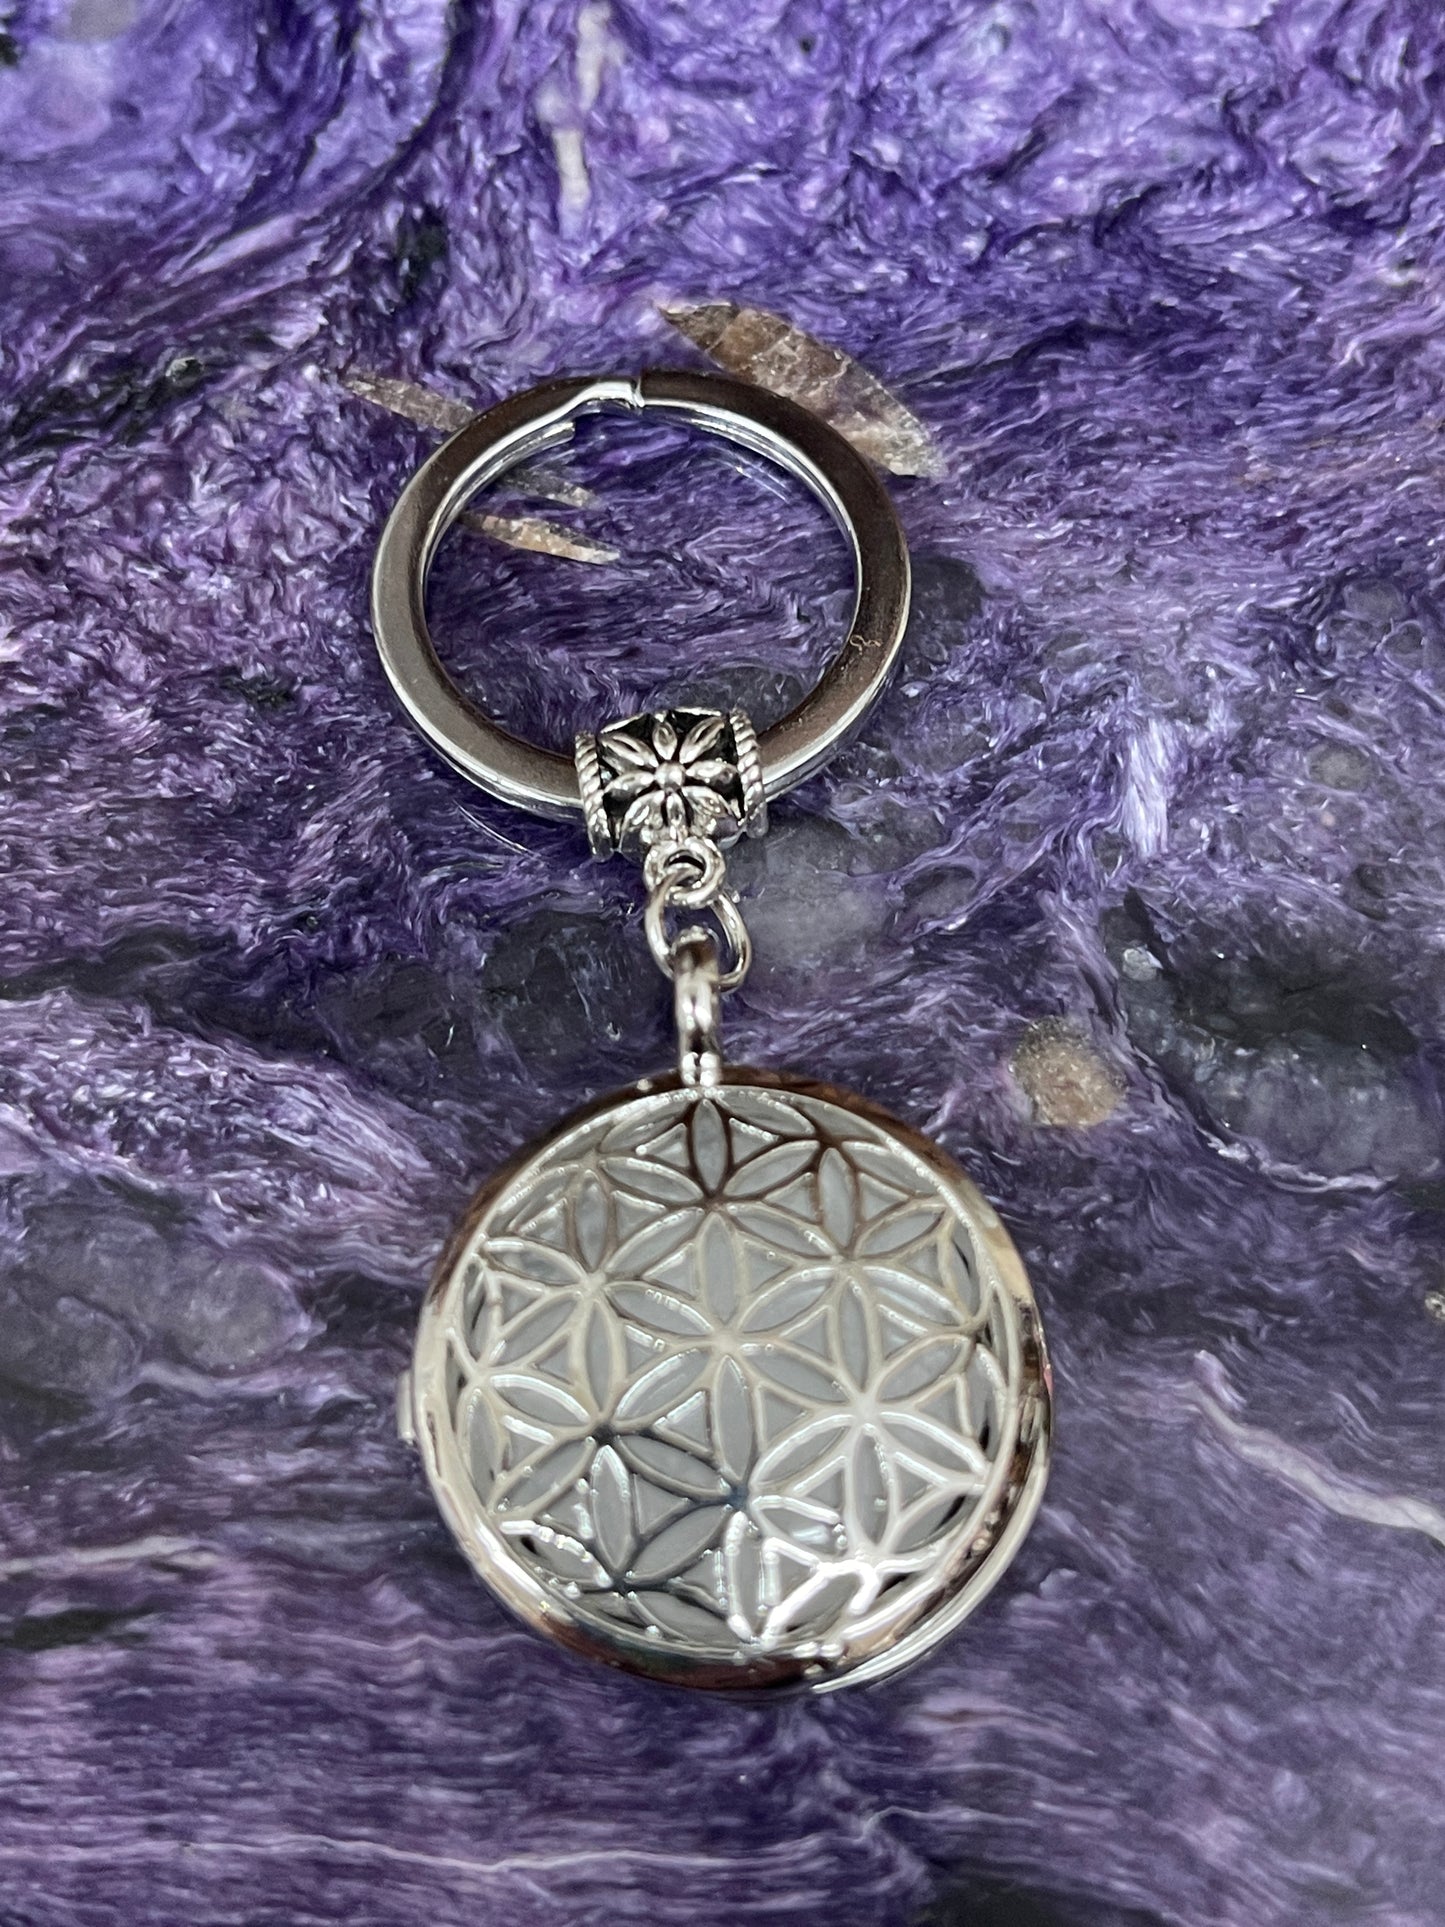 Locket Keychains- Available in 3 Designs